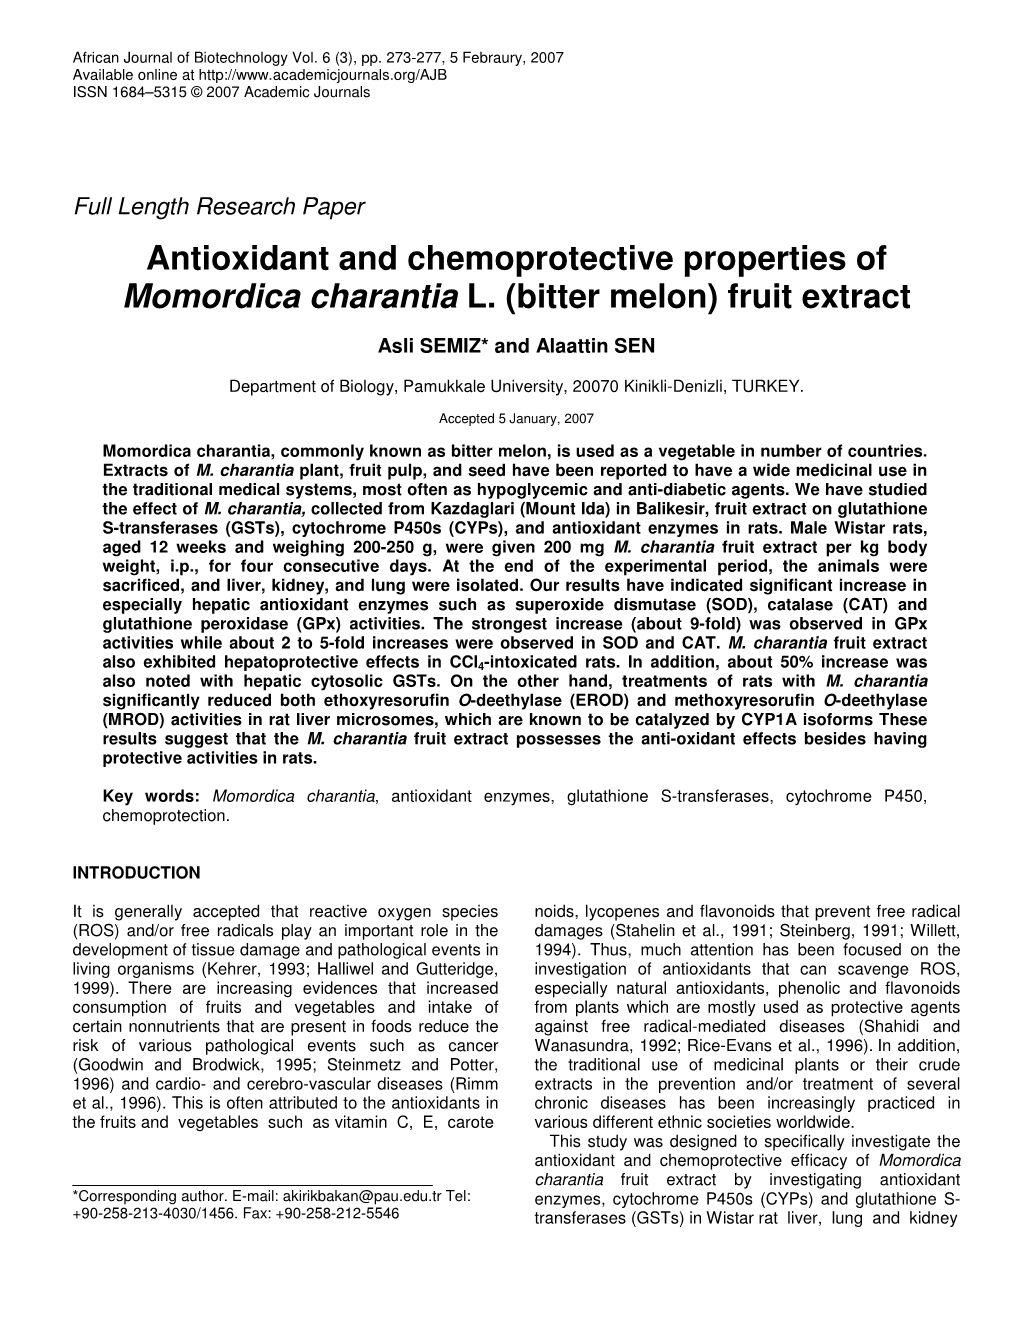 Antioxidant and Chemoprotective Properties of Momordica Charantia L. (Bitter Melon) Fruit Extract